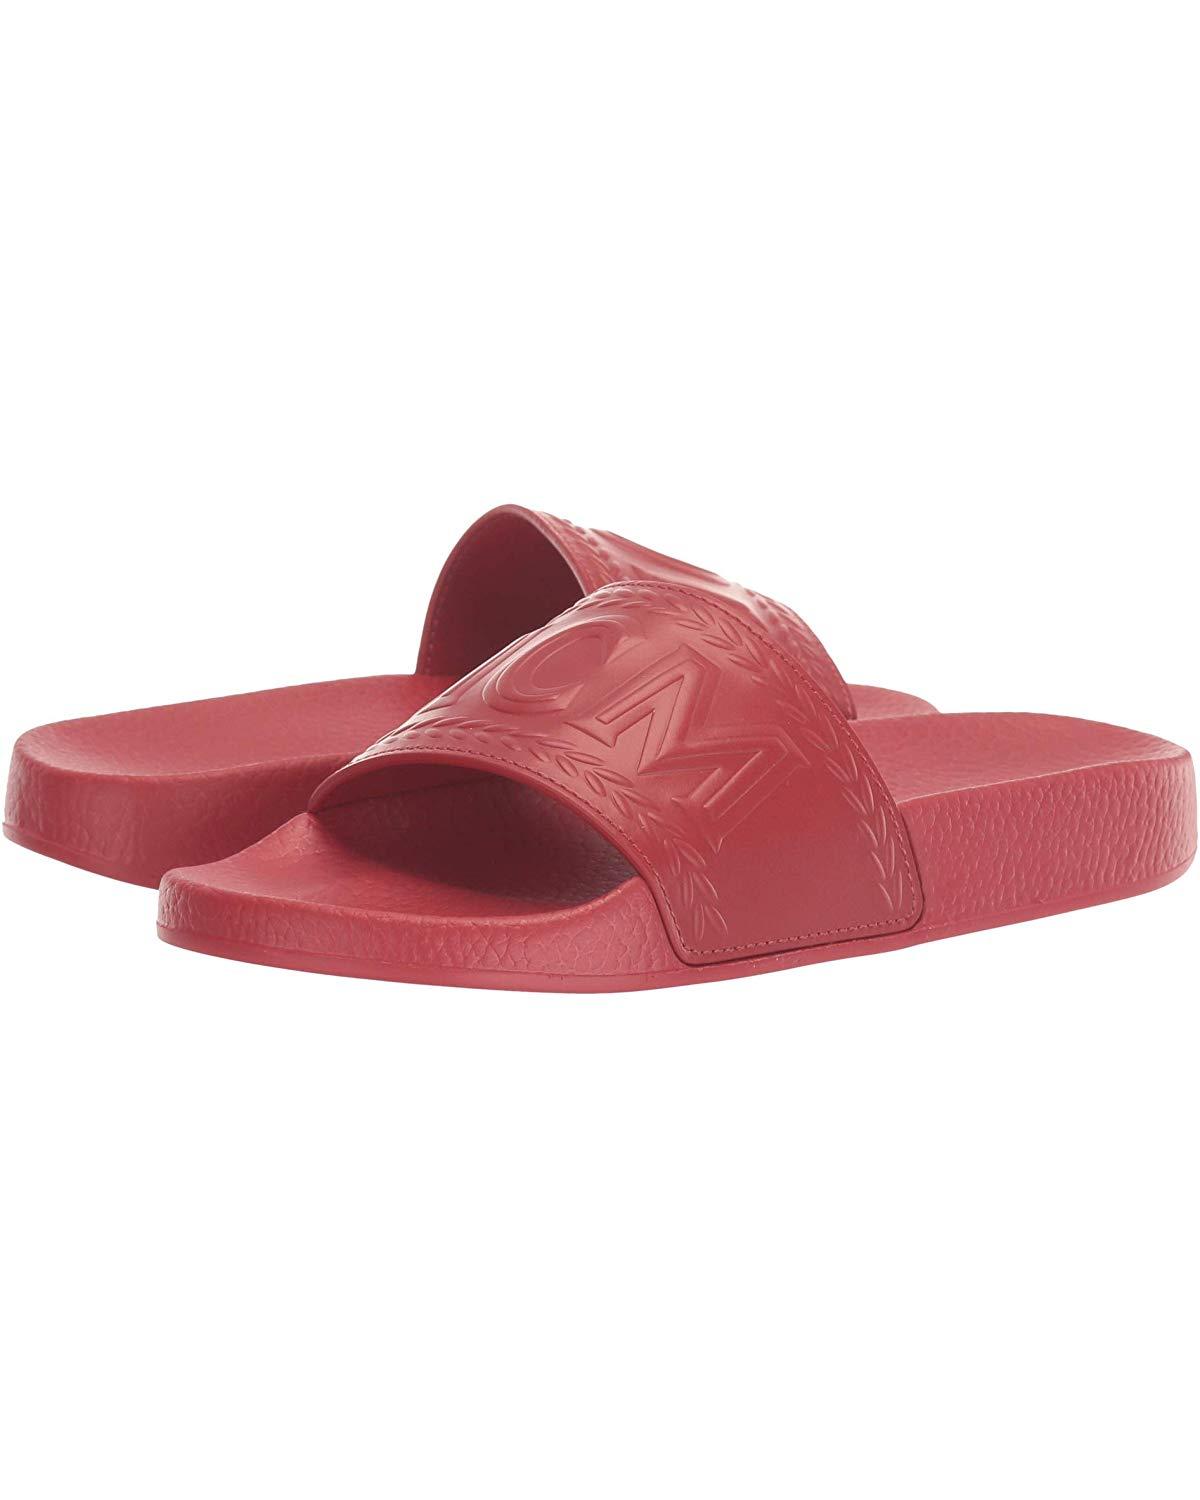 MCM Leather Logo Group Slide in Red - Lyst